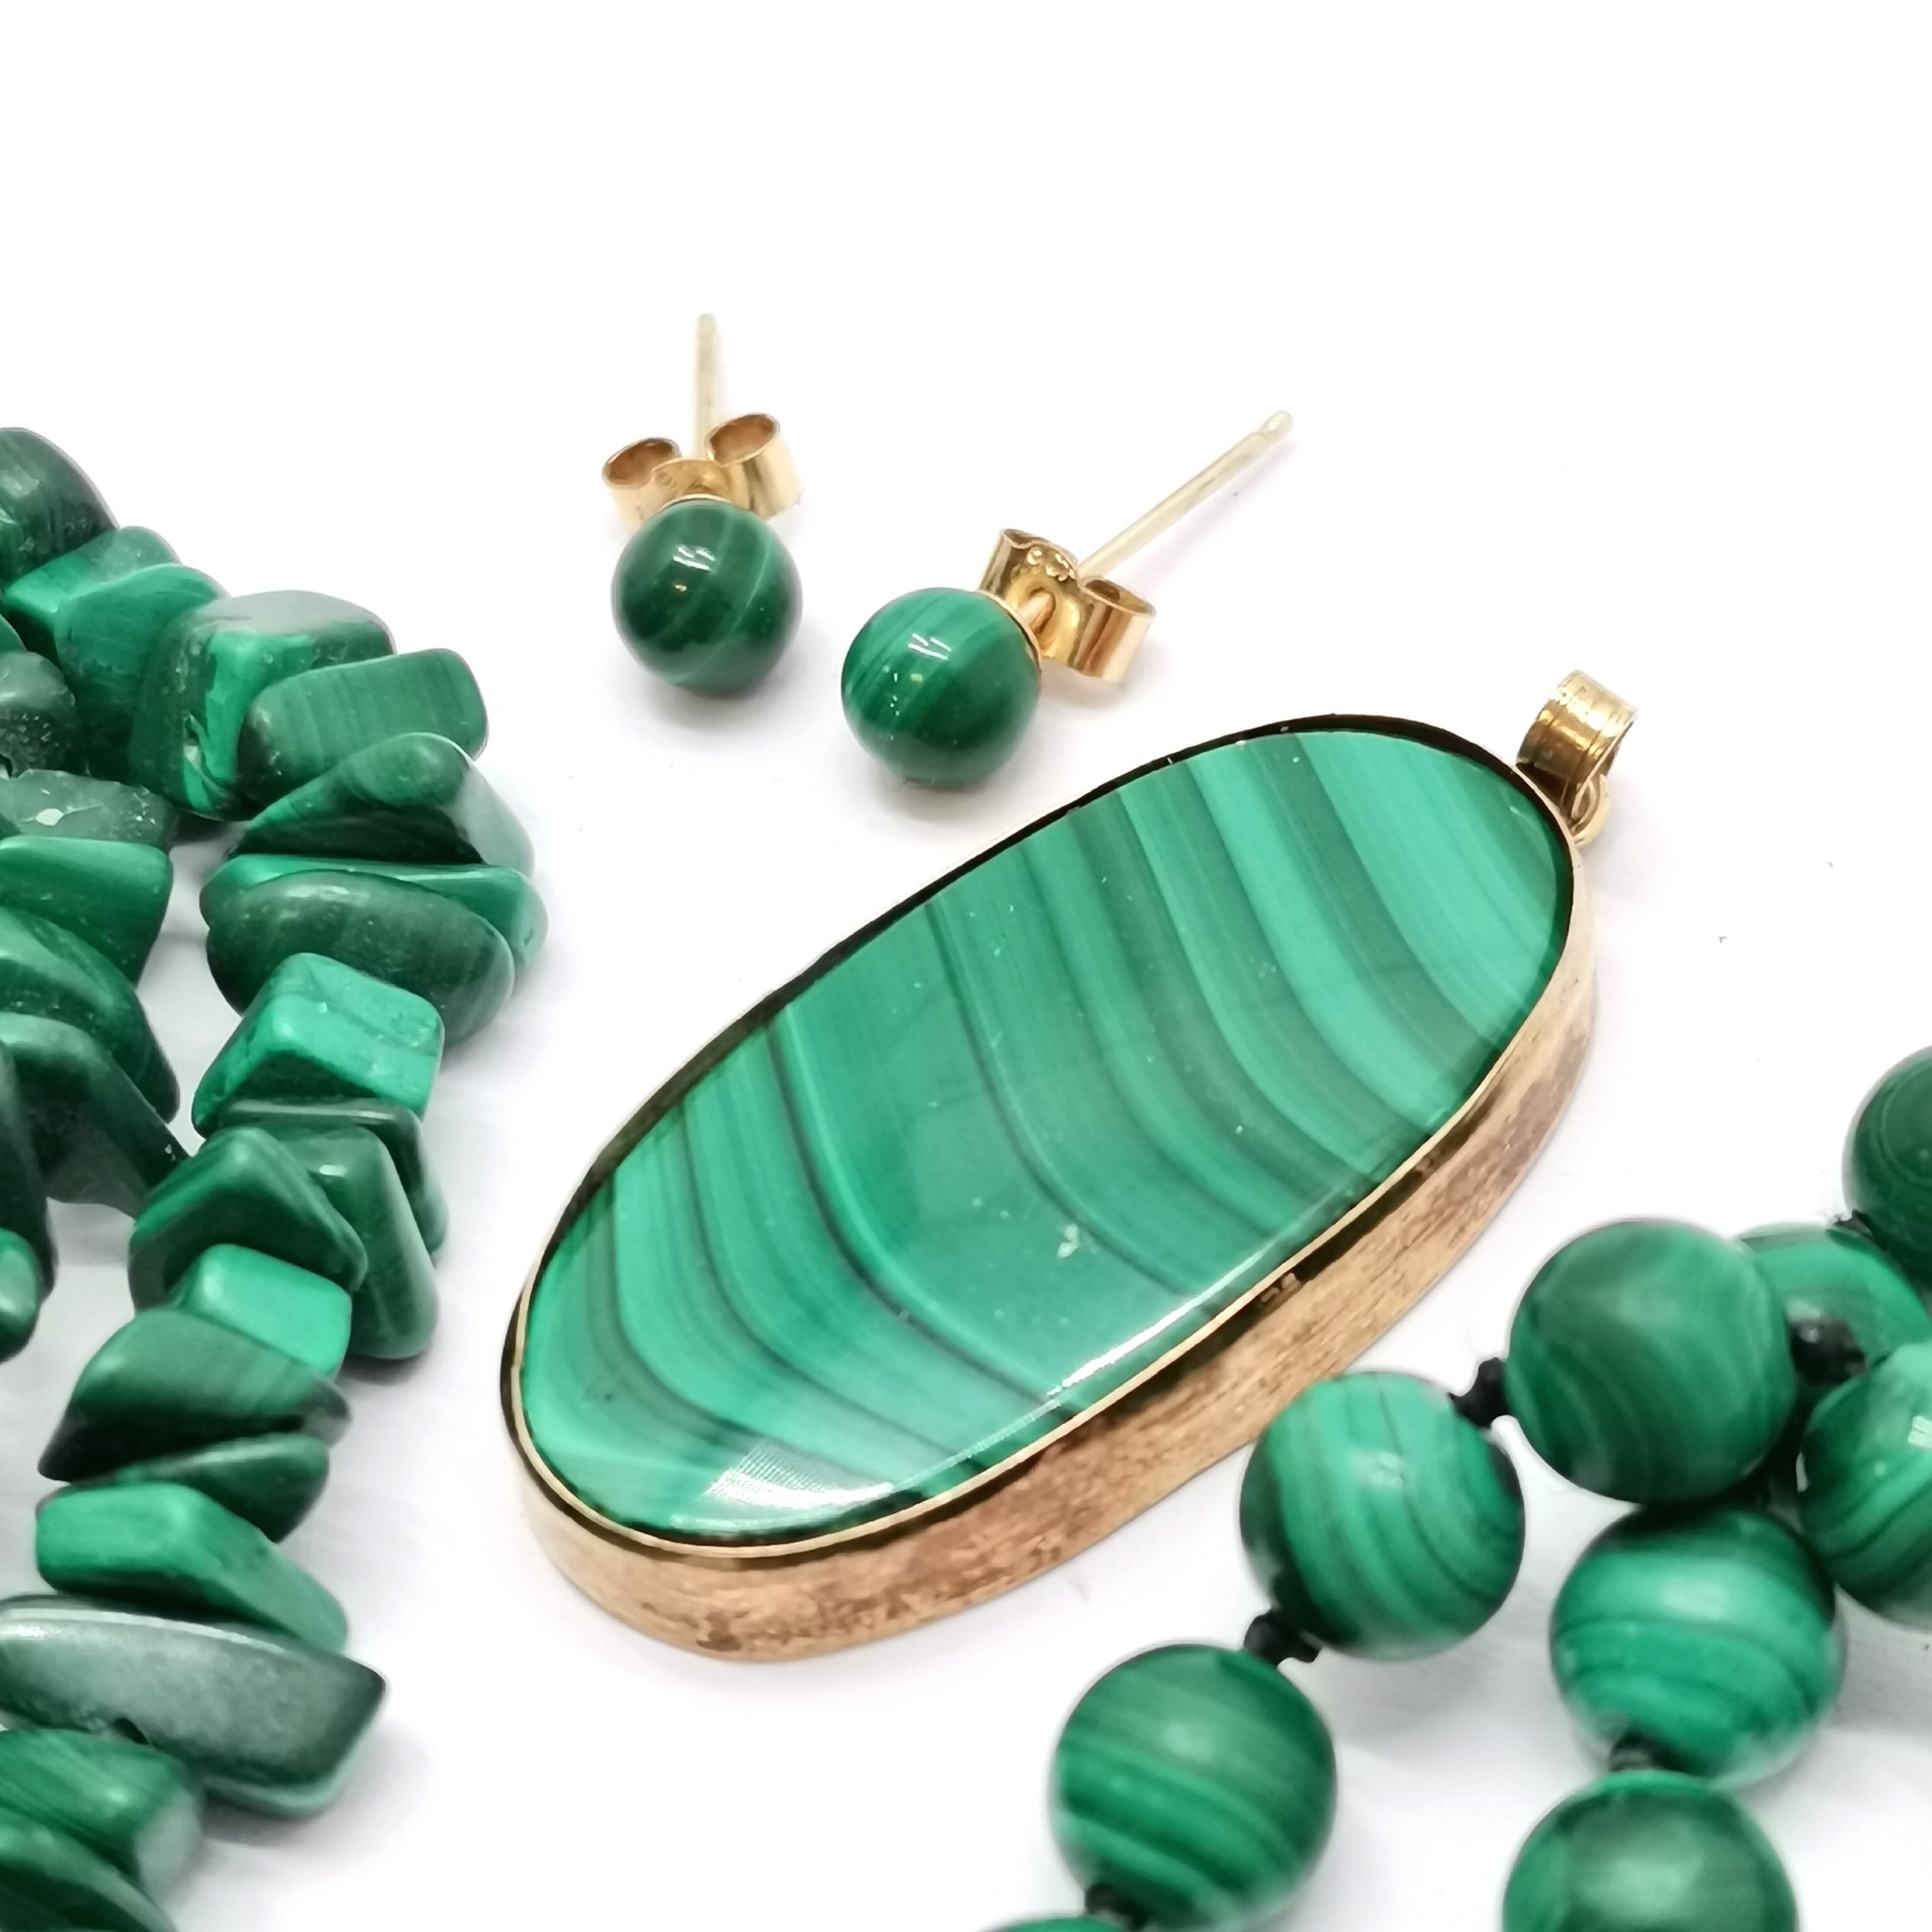 9ct gold mounted malachite bead necklace (44cm), pendant & earrings t/w raw malachite necklace - Image 2 of 3